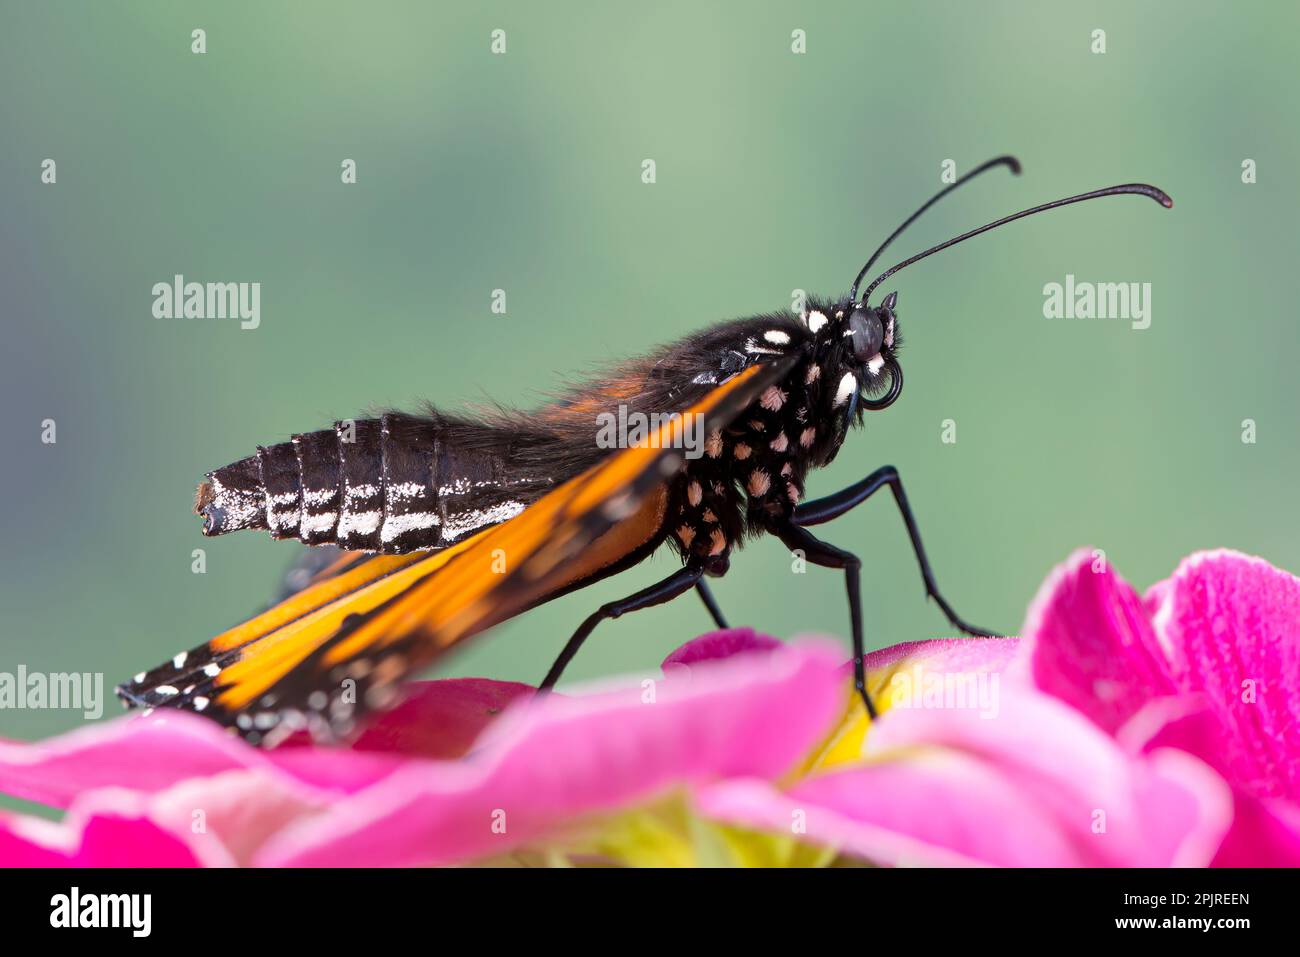 Hairy butterfly - Side view of a male monarch butterfly (danaus plexippus) showing its body and setae/hair Stock Photo